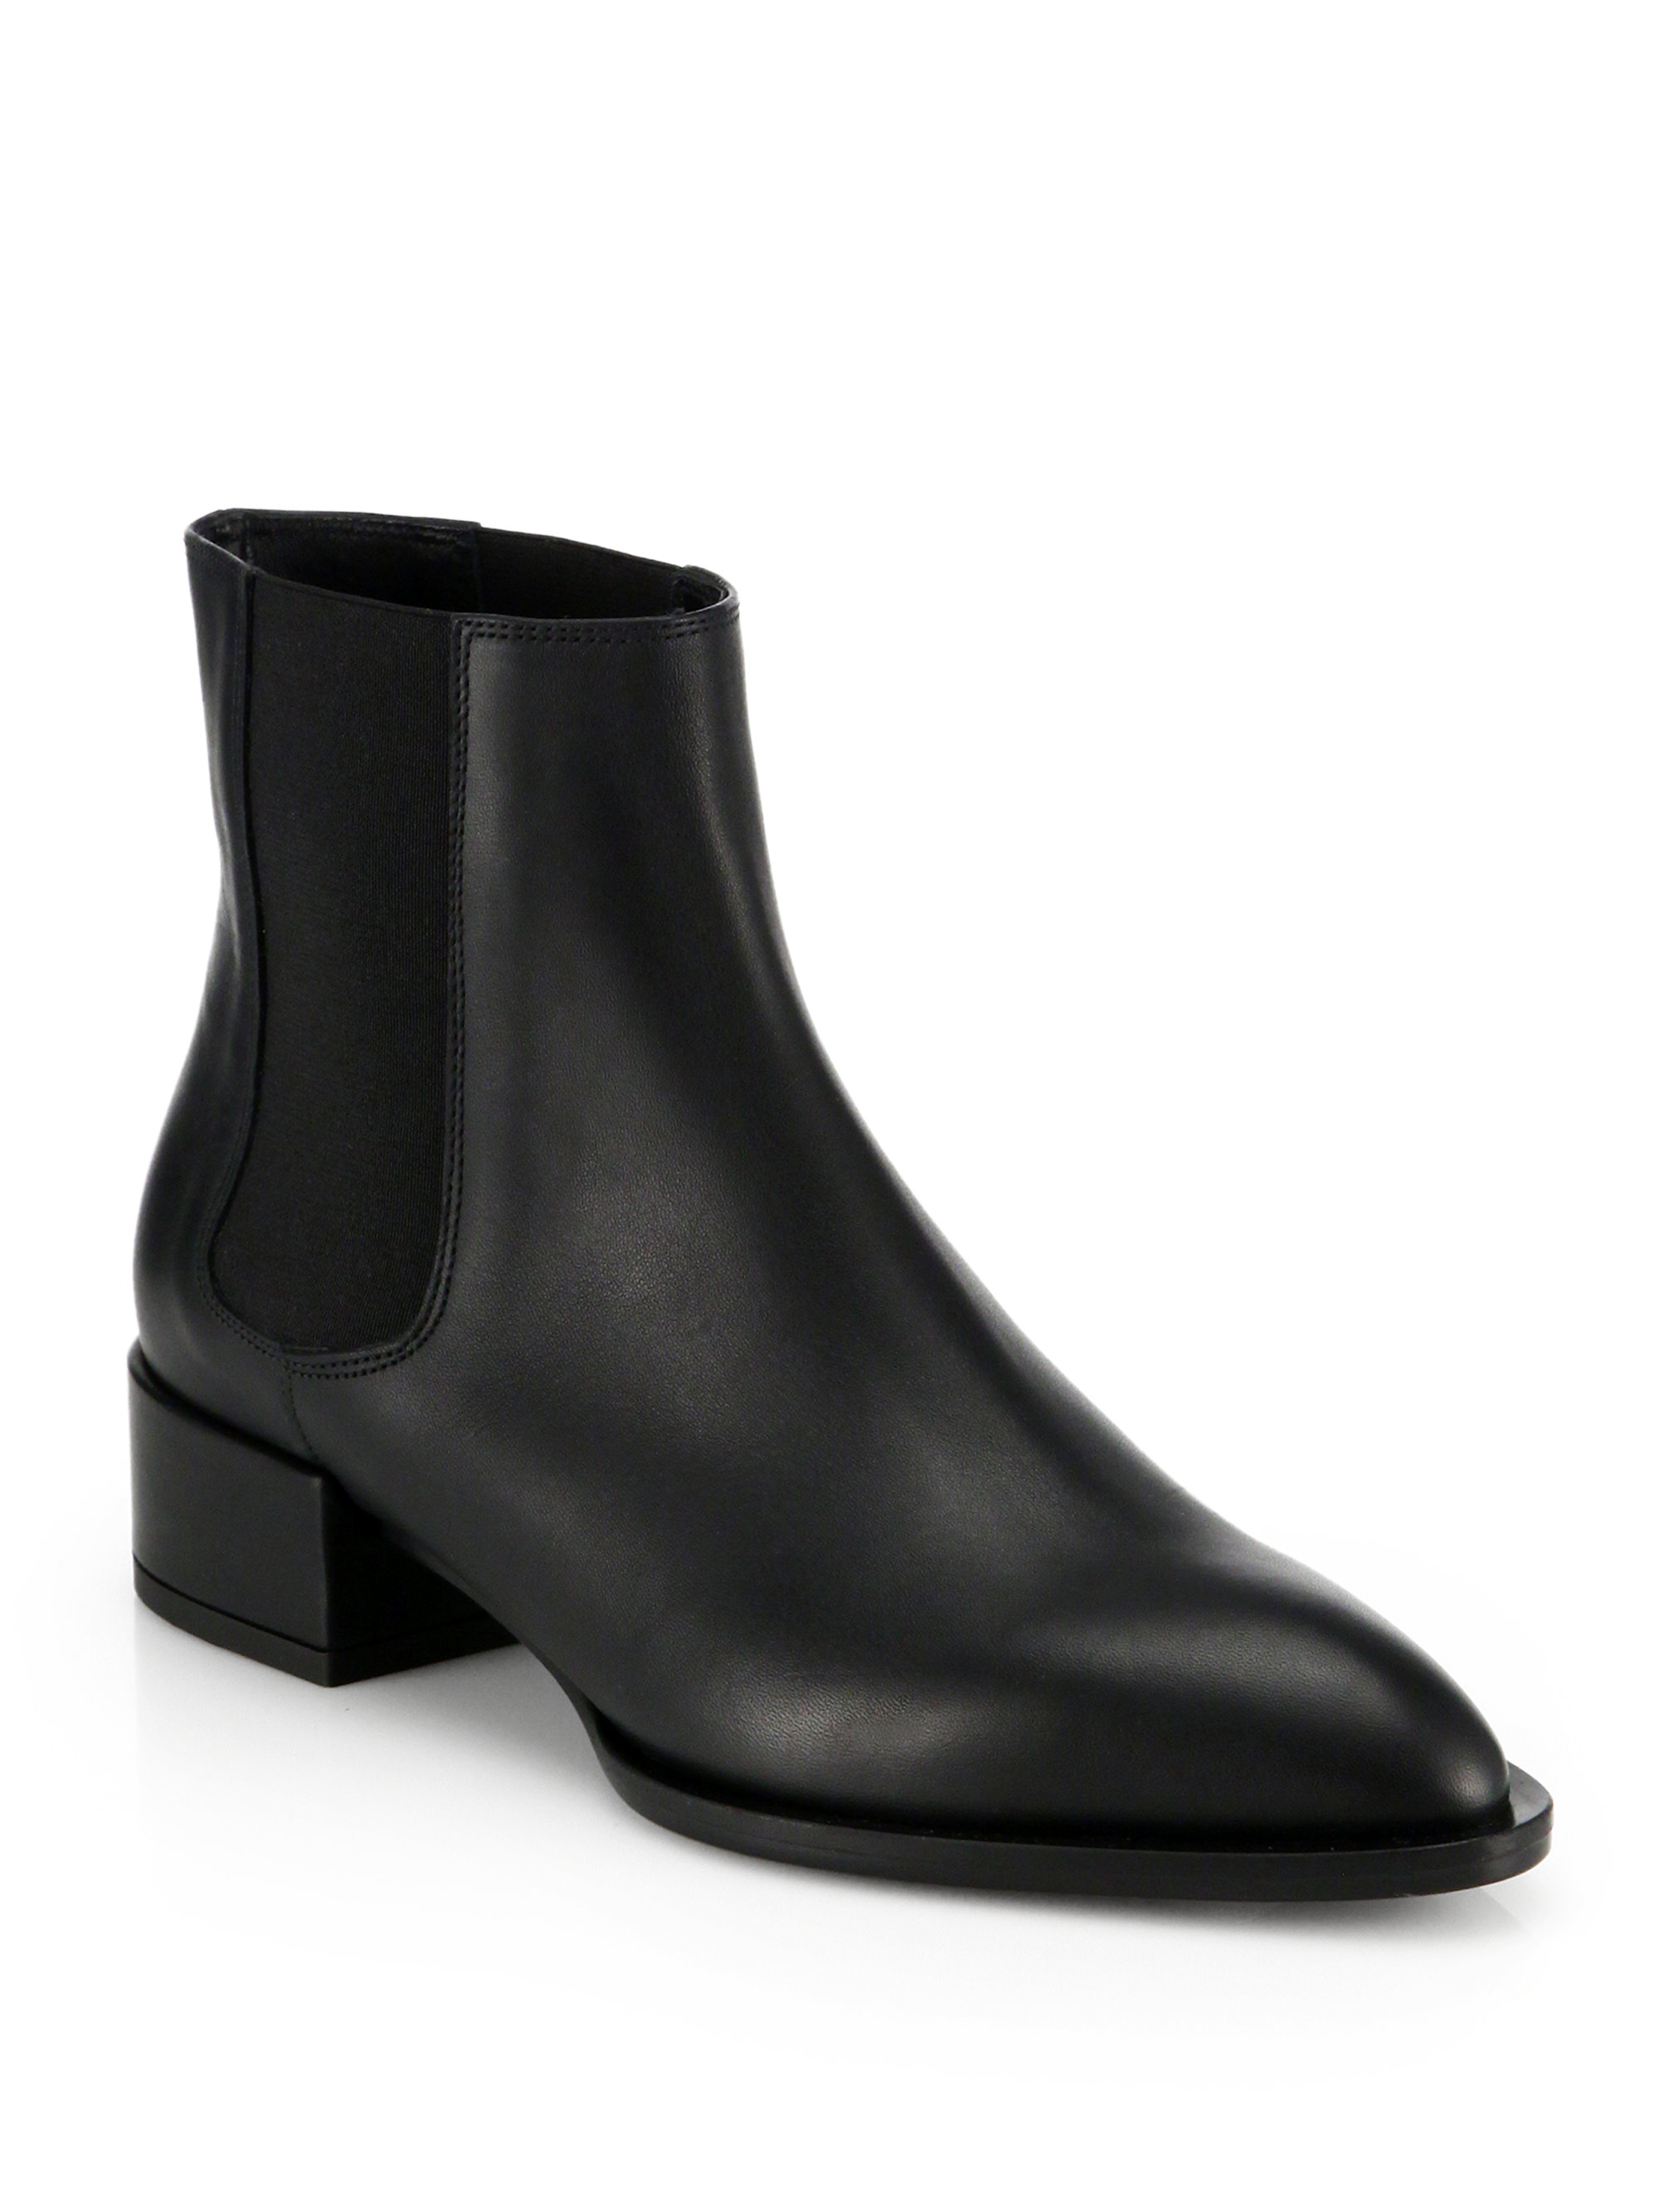 Vince Yale Leather Ankle Boots in Black 